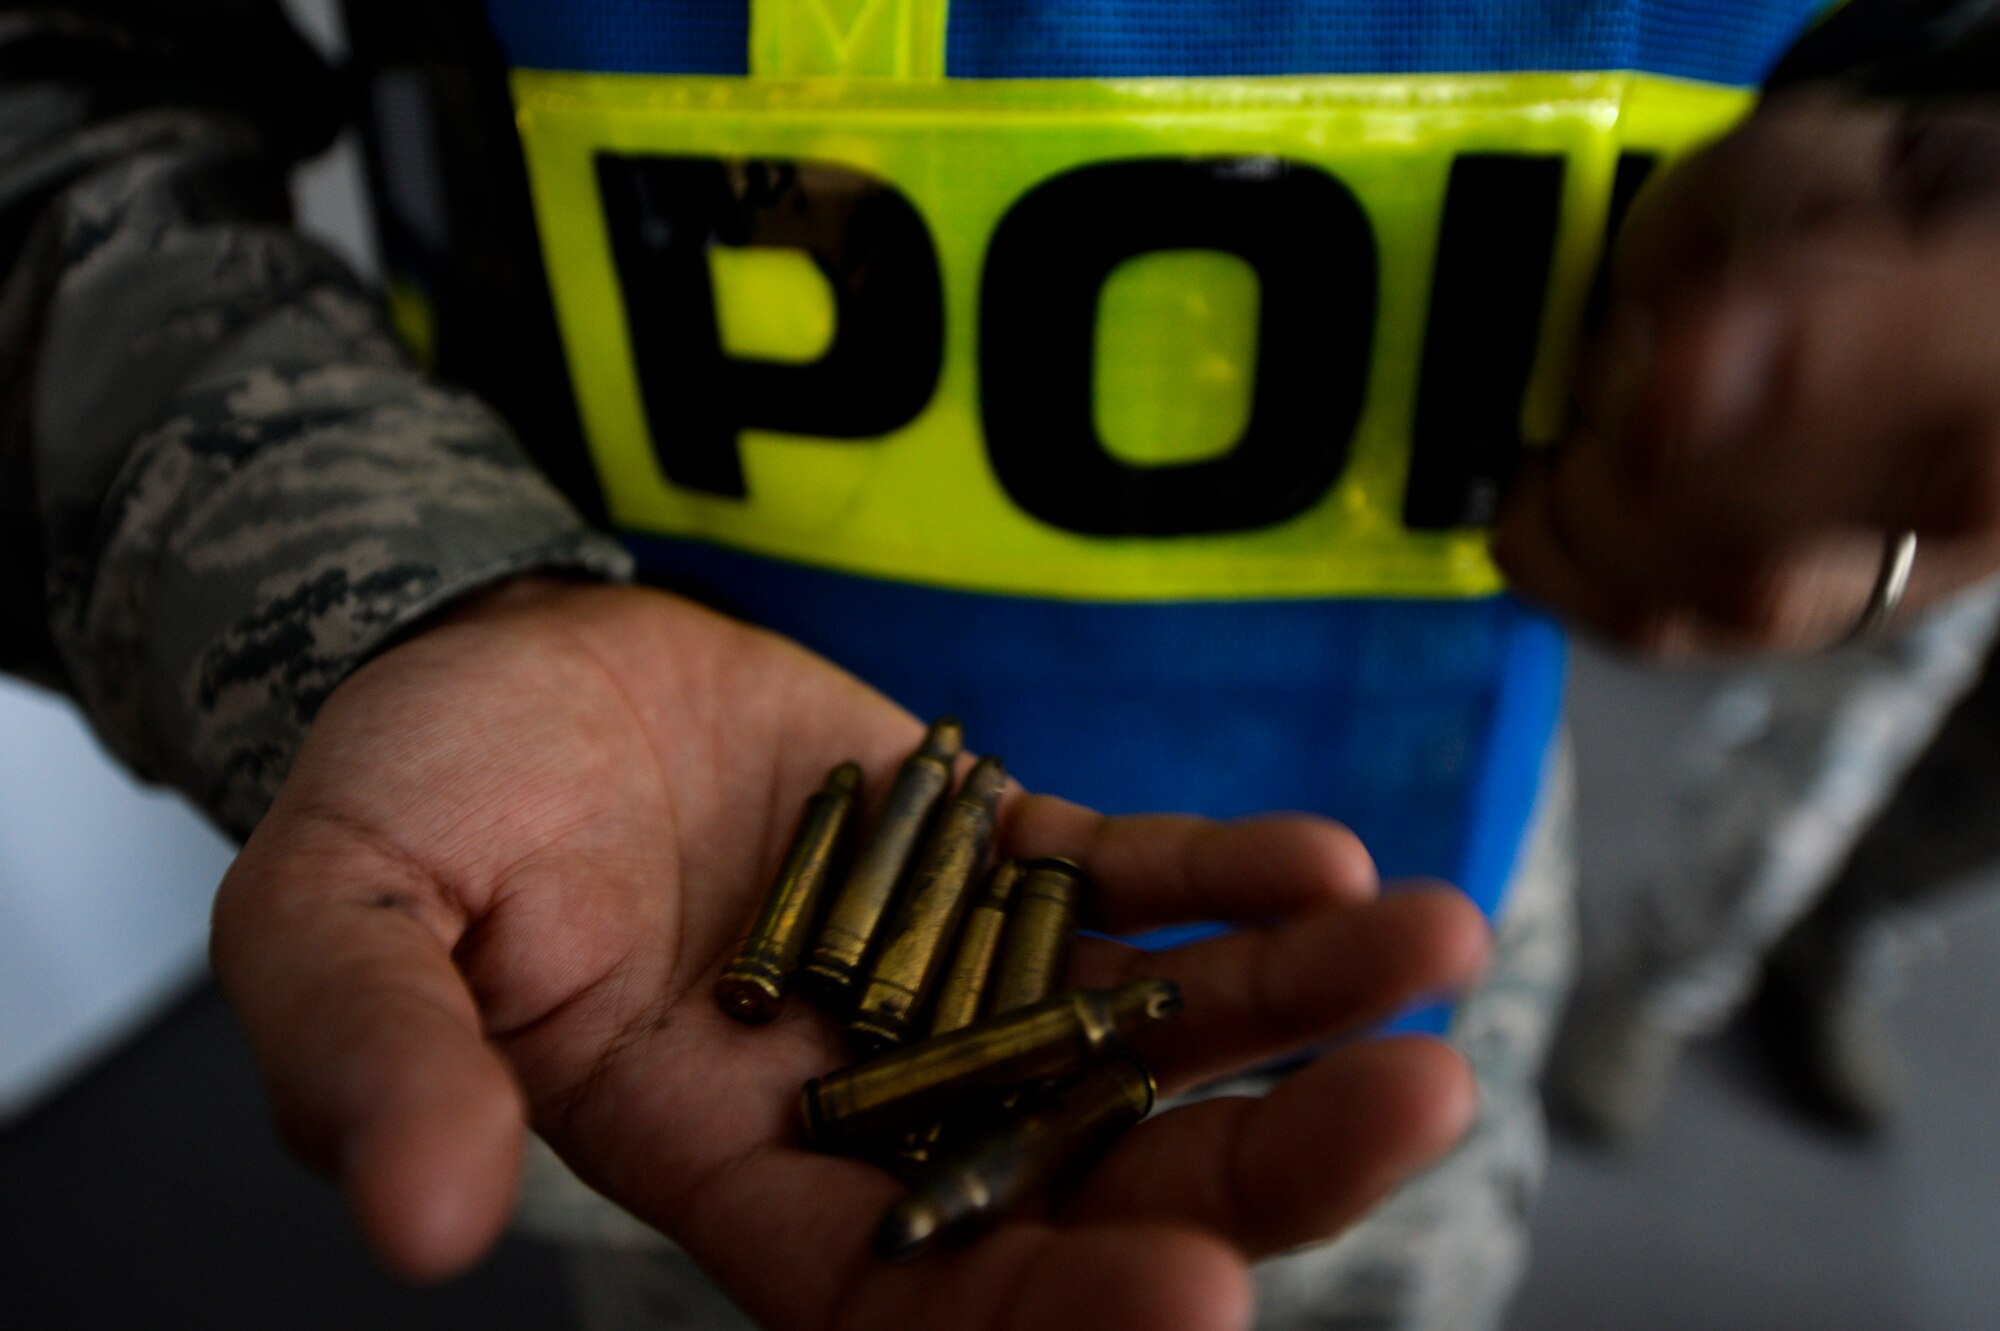 U.S. Air Force Tech Sgt. Steve Albvenra, 86th Security Forces noncommissioned officer in-charge of training, collects shell casings during an active shooter readiness training at the 86th Maintenance Group on Ramstein Air Base, Germany, July 12, 2017. Airmen from the 86th SFS fired blank ammunition during the readiness training in order to appeal to Airmen’s senses and highlight the importance of using a critical thought process during emergency situations. (U.S. Air Force photo by Staff Sgt. Nesha Humes)